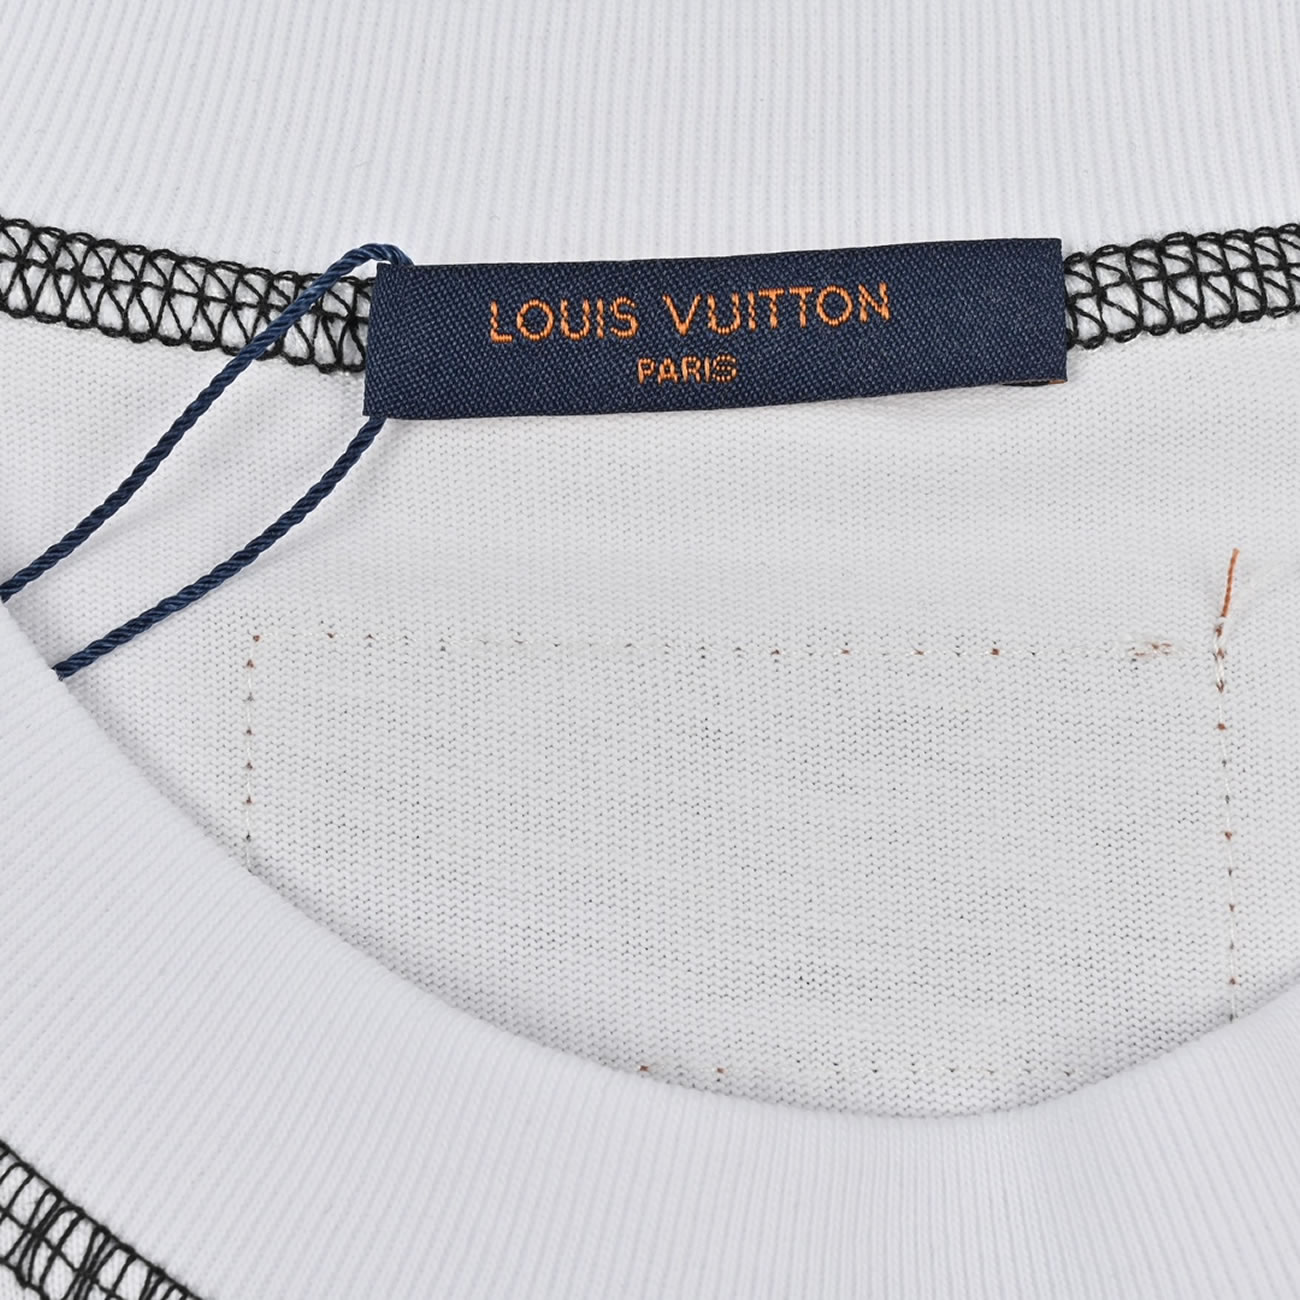 Louis Vuitton 24ss Stitching Cursive Embroidery Letters, Short Sleeves T Shirt (7) - newkick.org